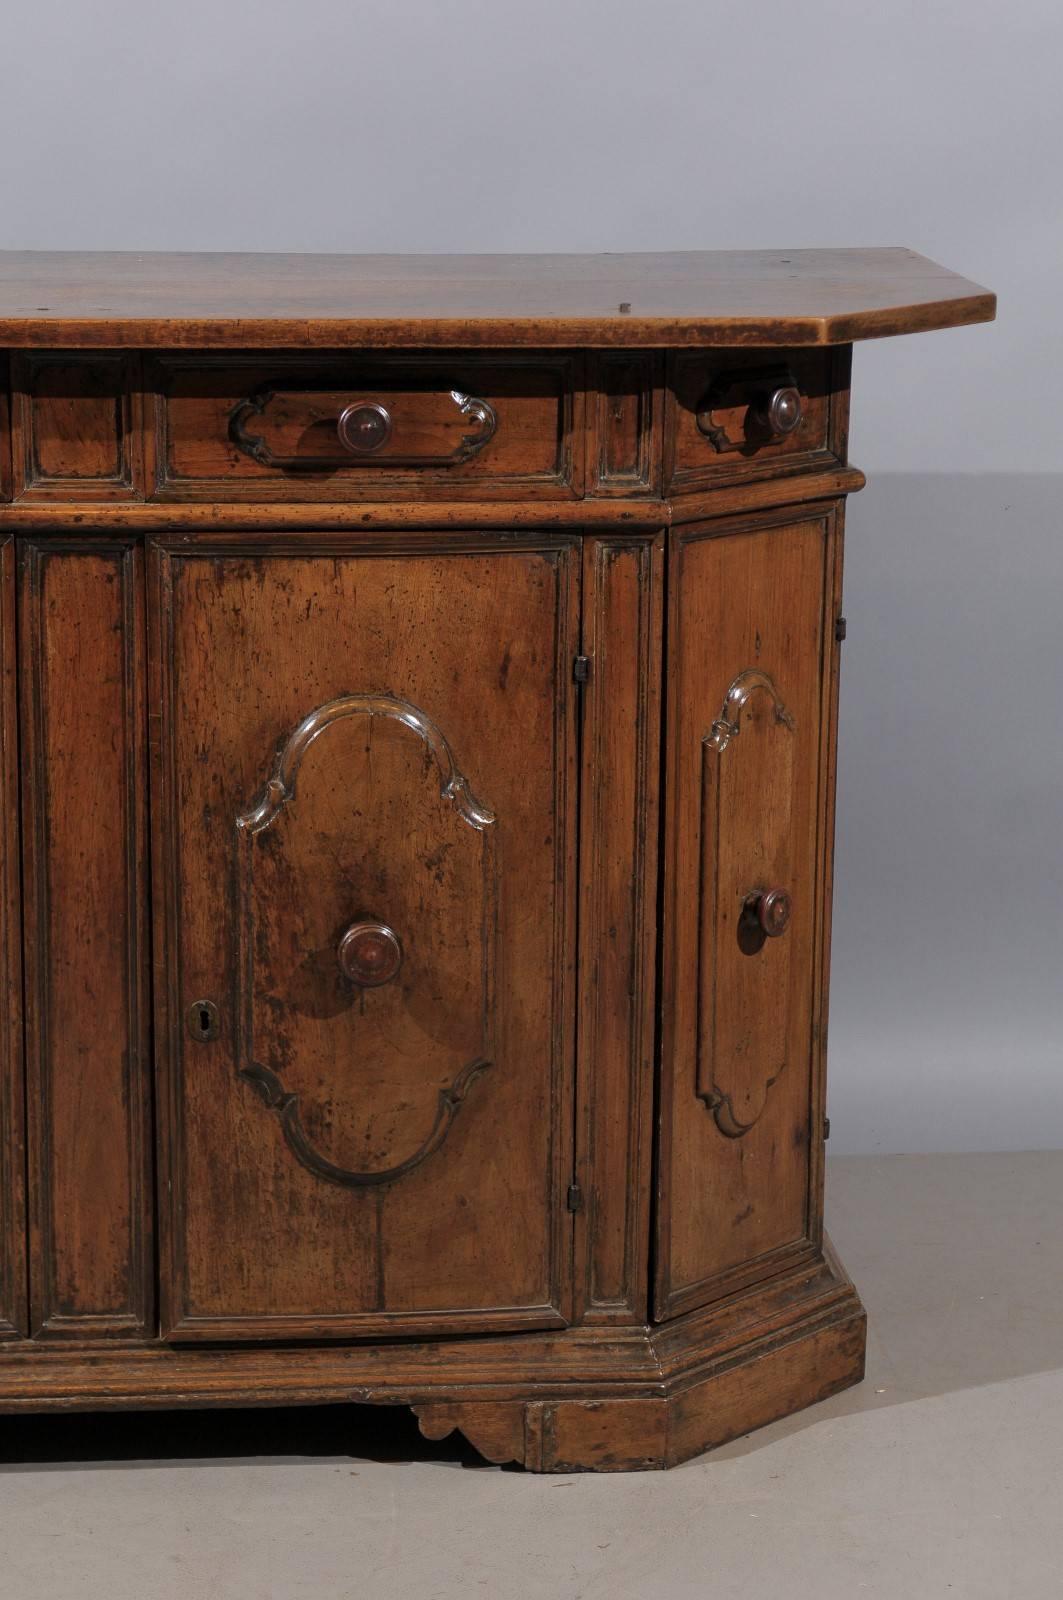 Italian 17th Century Walnut Credenza with Four Drawers and Cabinet Doors, Italy